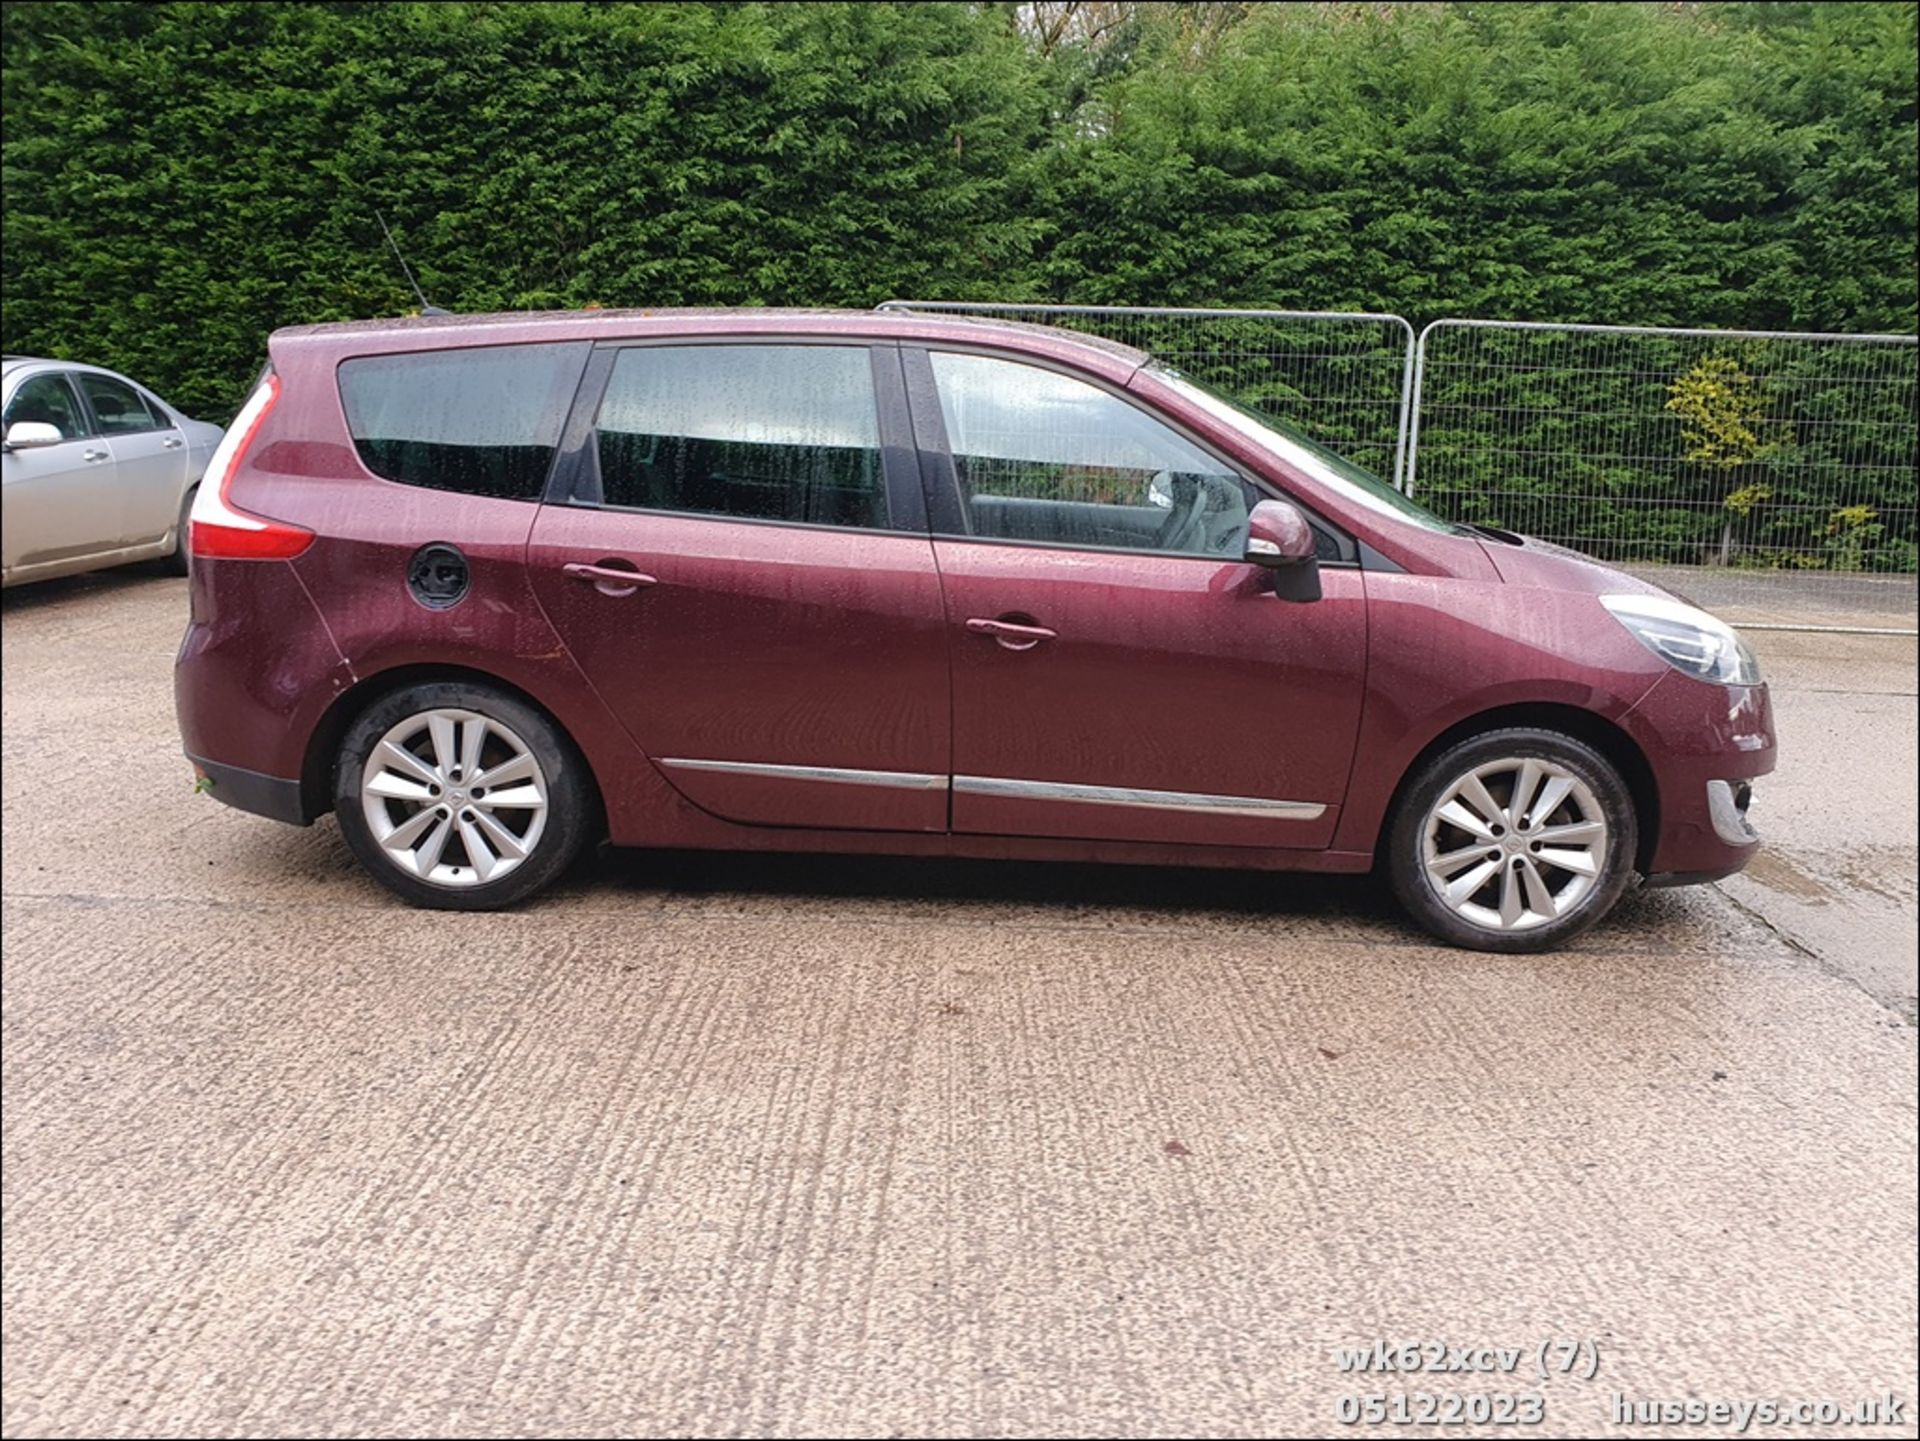 12/62 RENAULT G SCENIC D-QUETTLUXE NRG - 1598cc 5dr MPV (Red) - Image 8 of 53